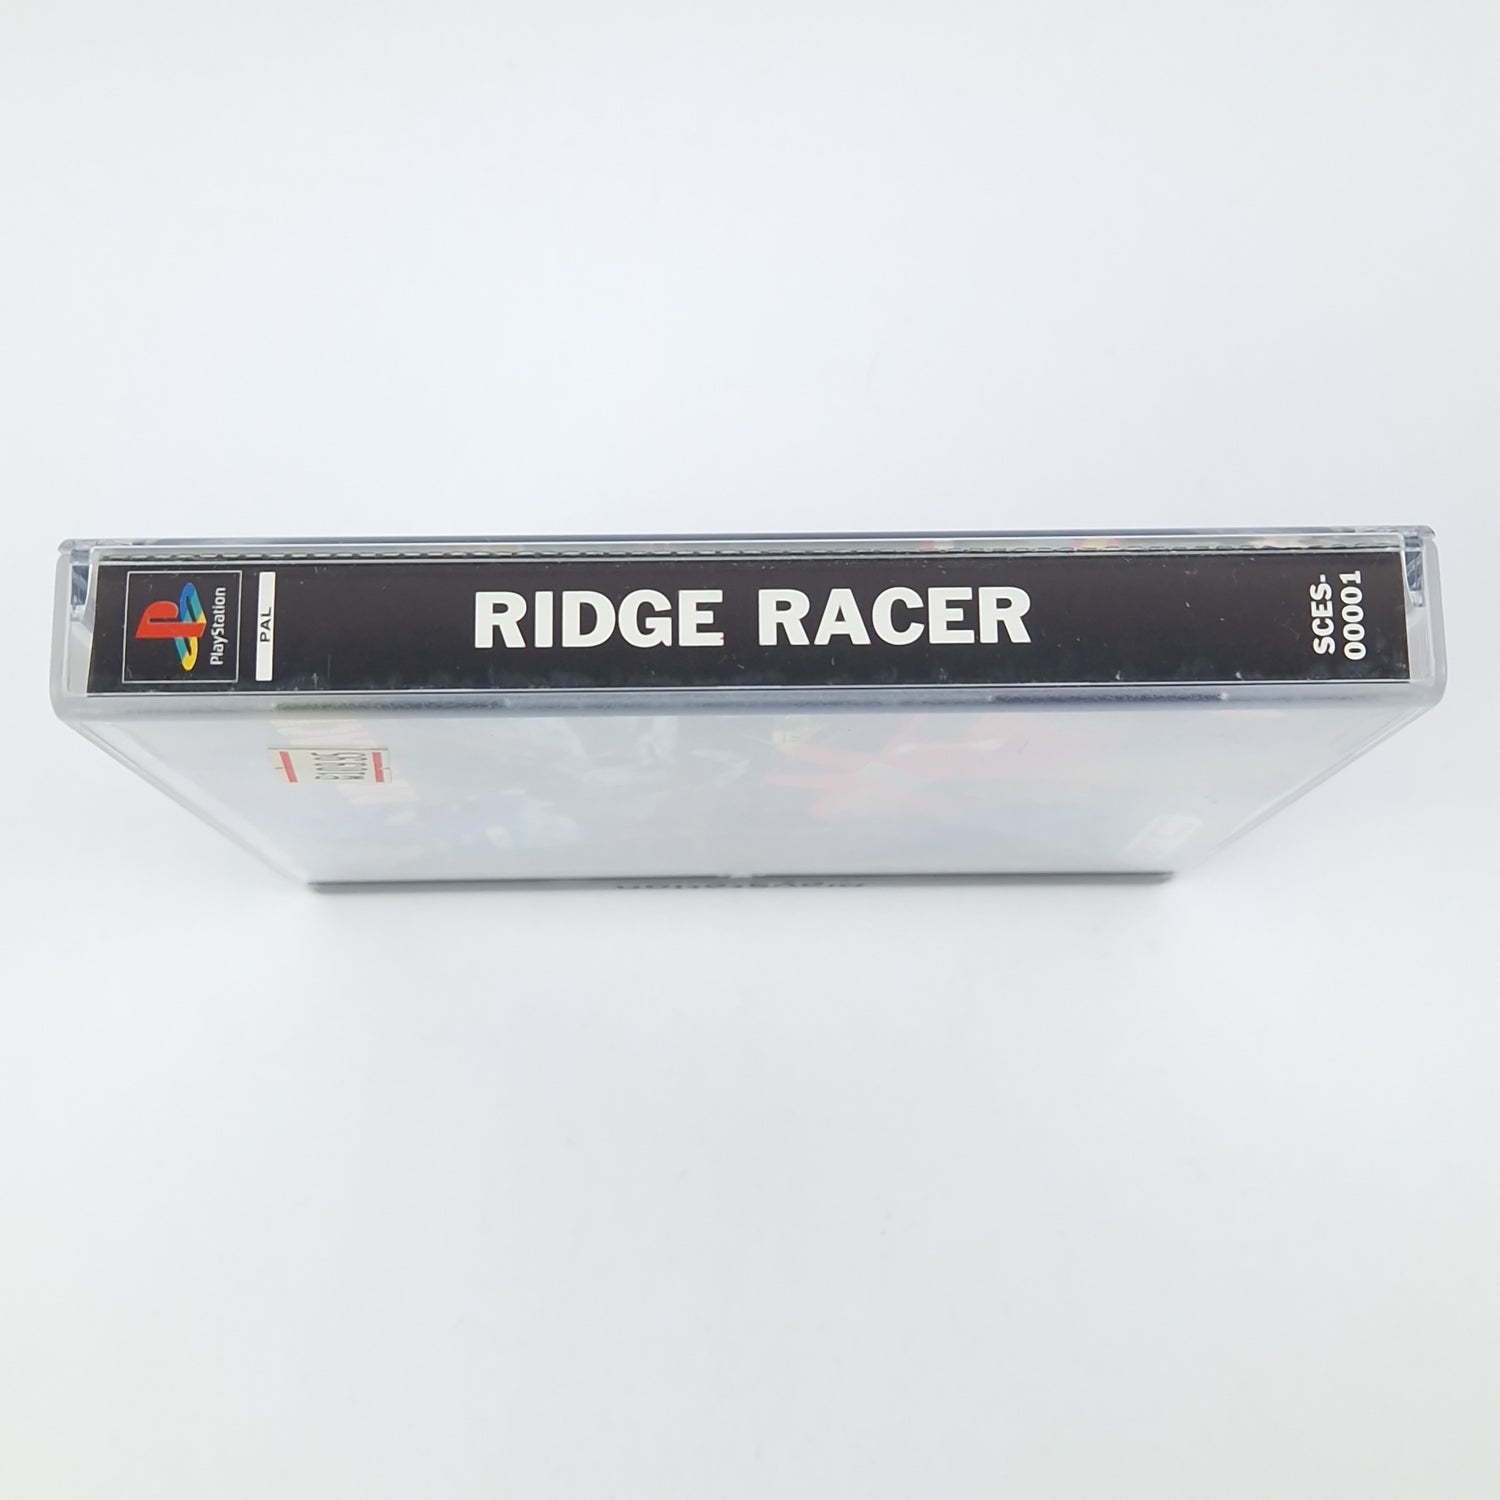 Playstation 1 Spiel : Ridge Racer - CD Anleitung OVP | SONY PS1 PSX PAL